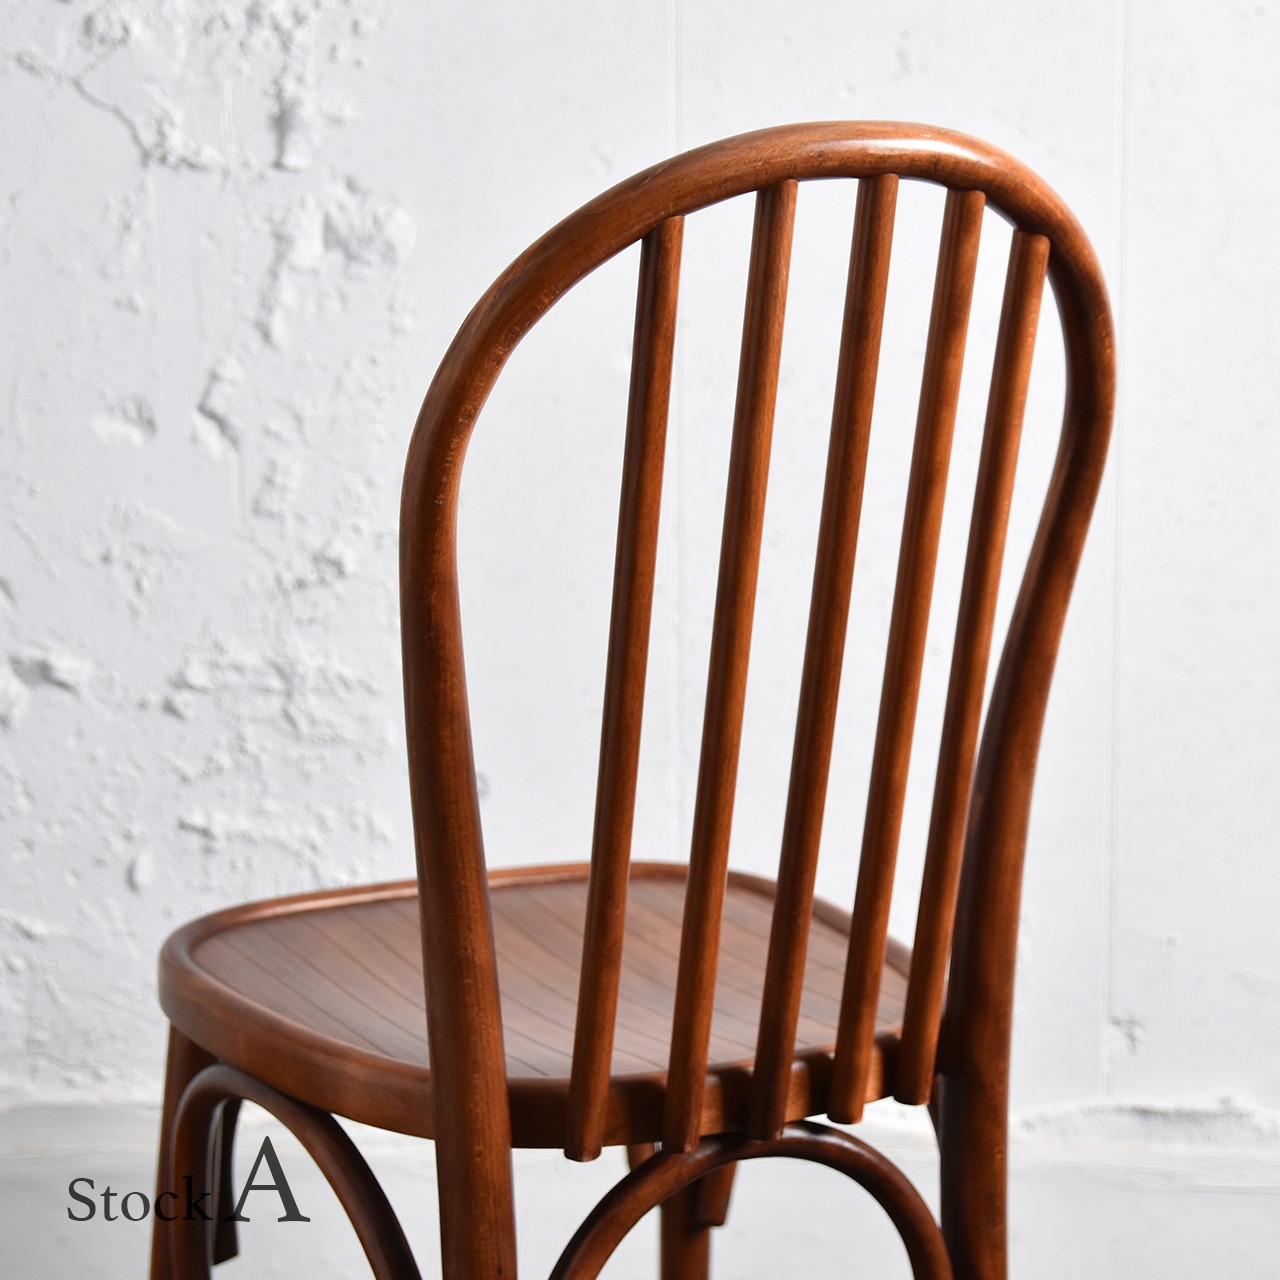 Bentwood Chair 【A】 / ベントウッド チェア / 2209BNS-003A